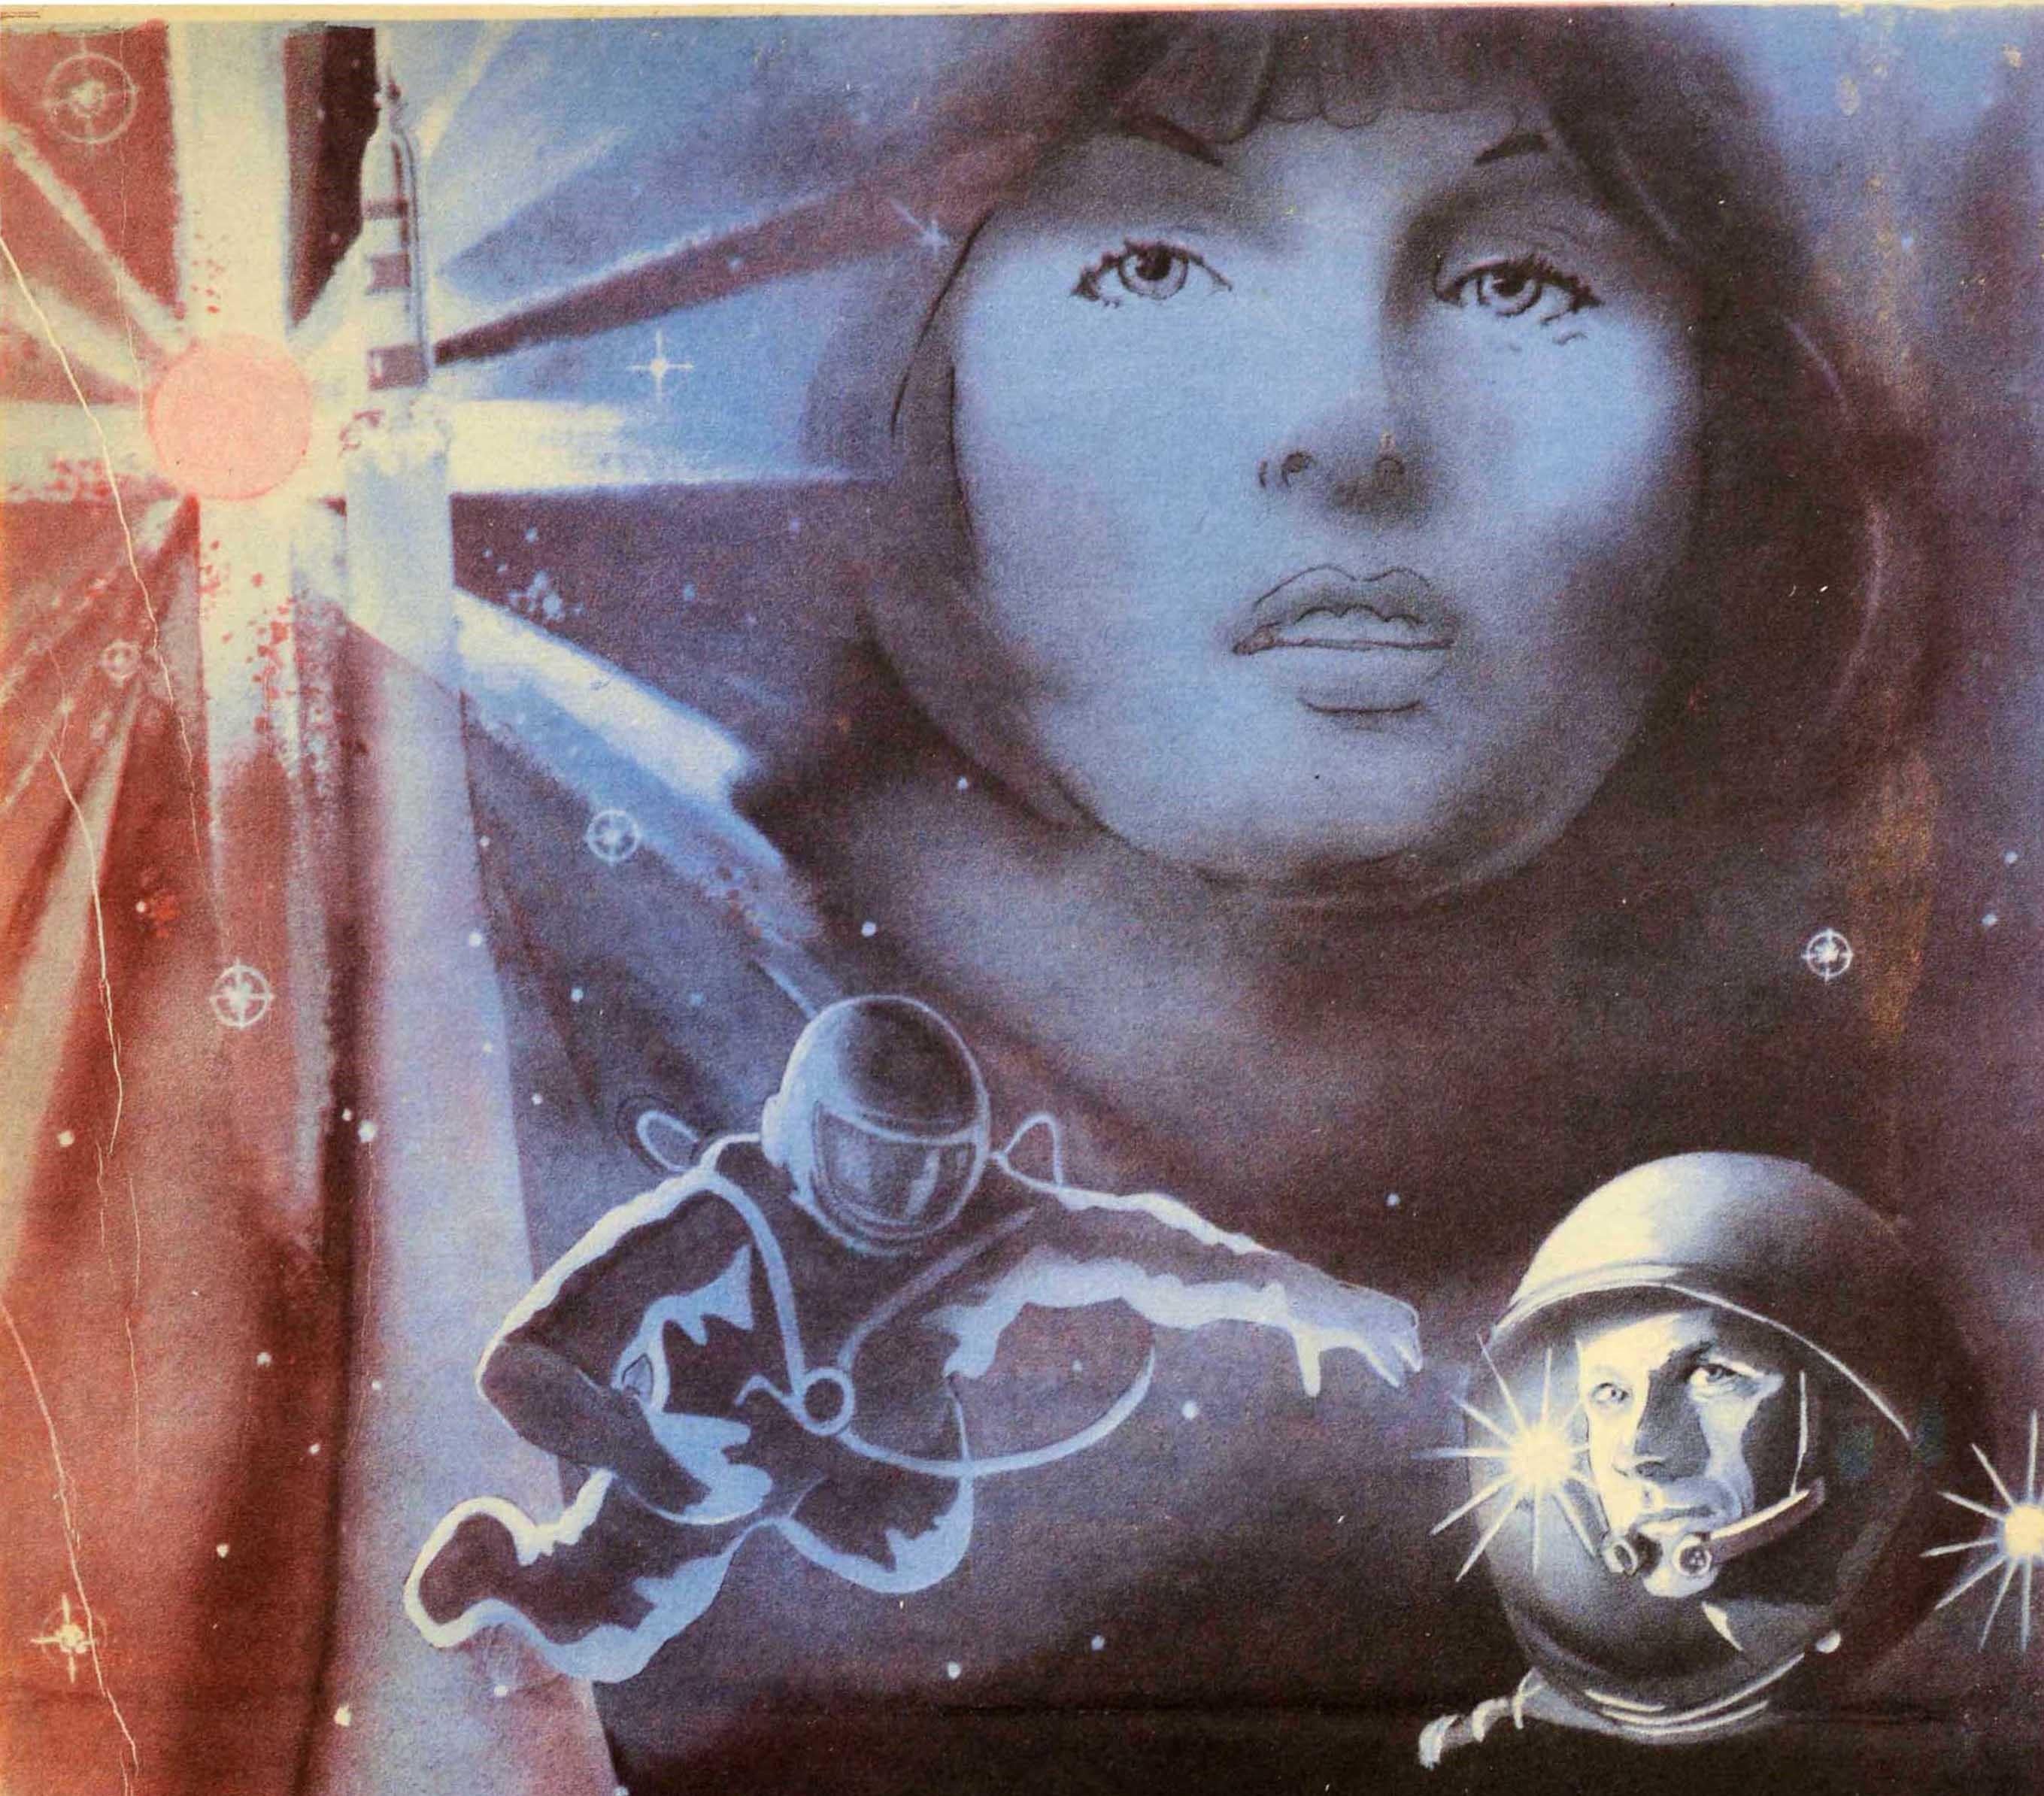 Original vintage Soviet science fiction adventure film Return From Orbit / ??????????? ? ?????? directed by Aleksandr Surin about a team of cosmonauts / astronauts sent to evacuate a crew on an orbital station after it was hit during a meteor storm